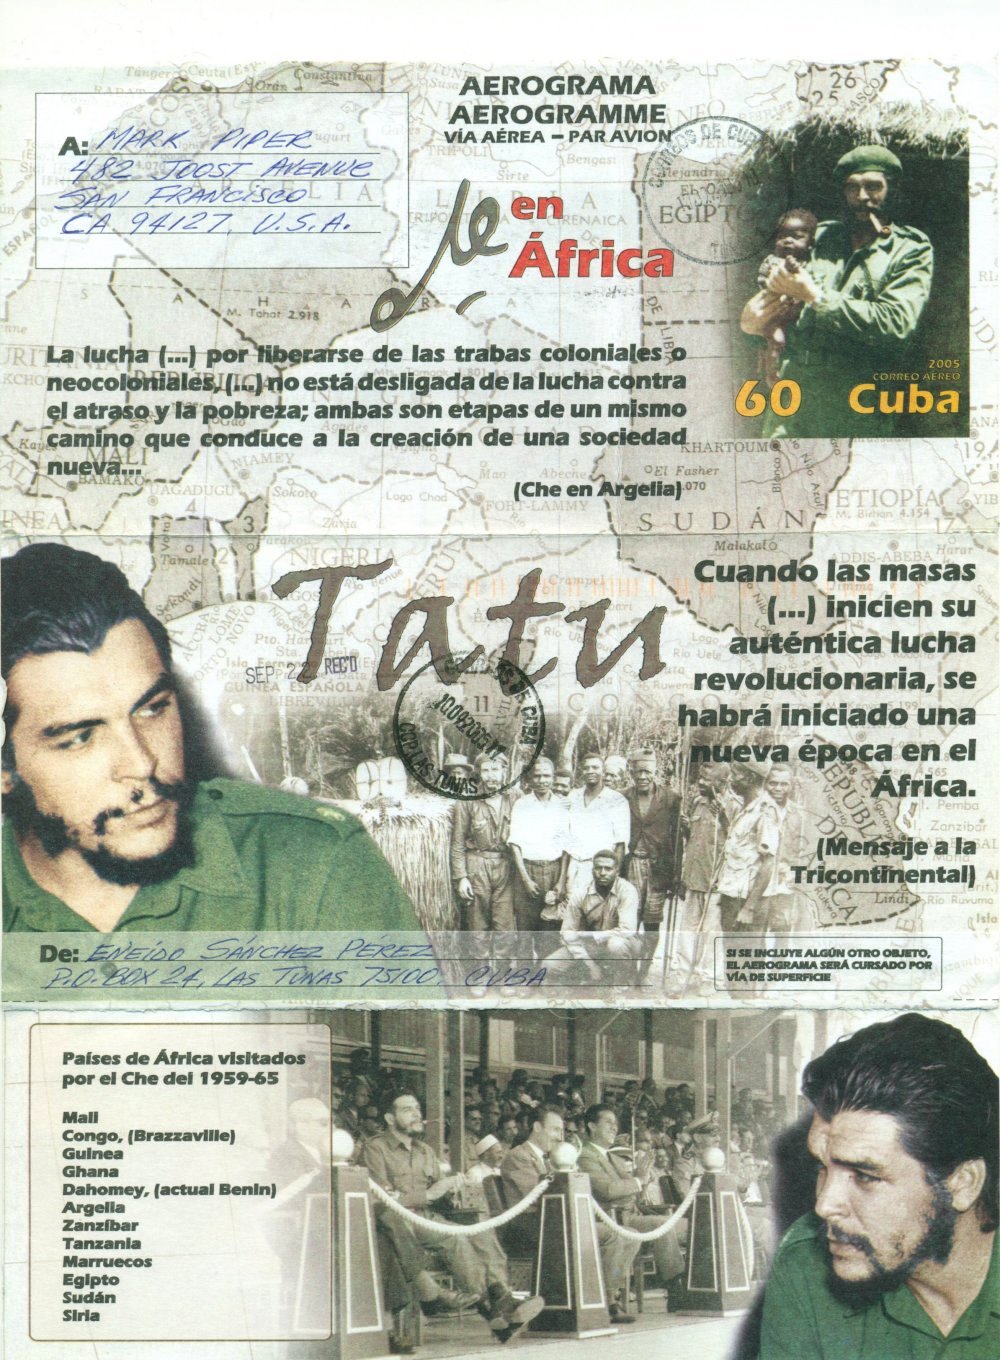 2005 - Che in Africa Aerogram used